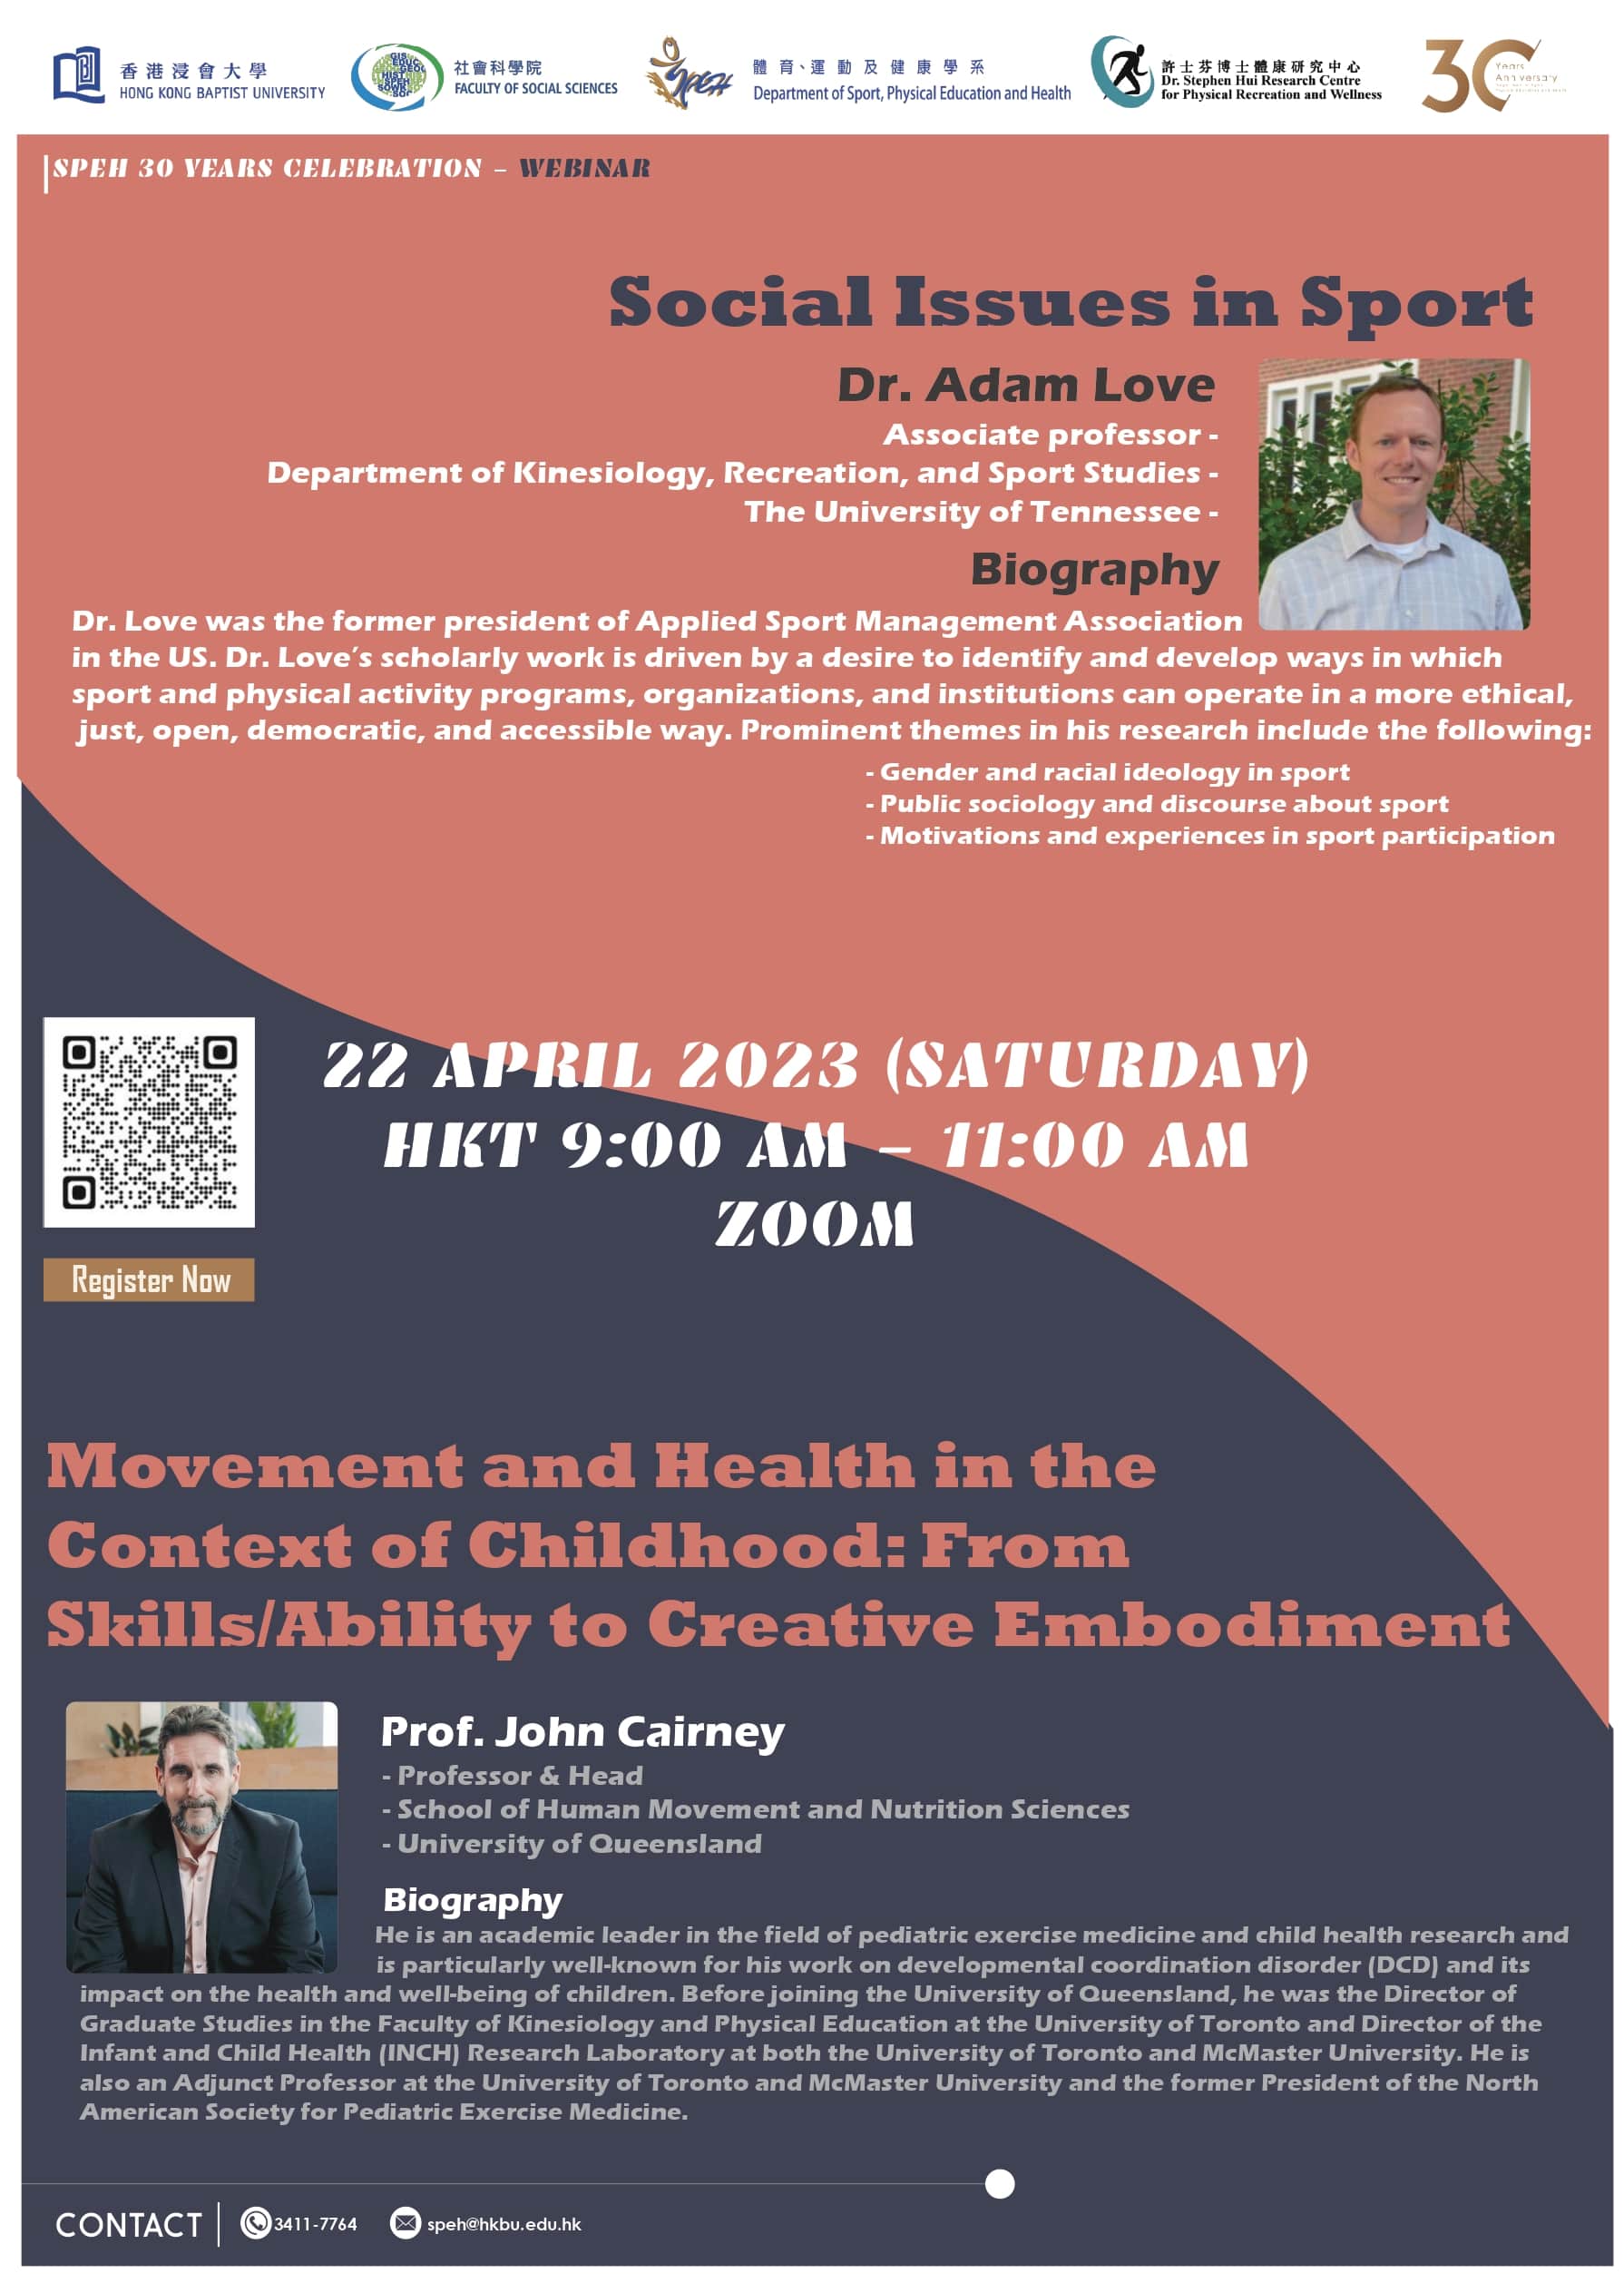 Research seminar: Social Issues in Sports presented by Prof. John Cairney and Dr. Adam Love